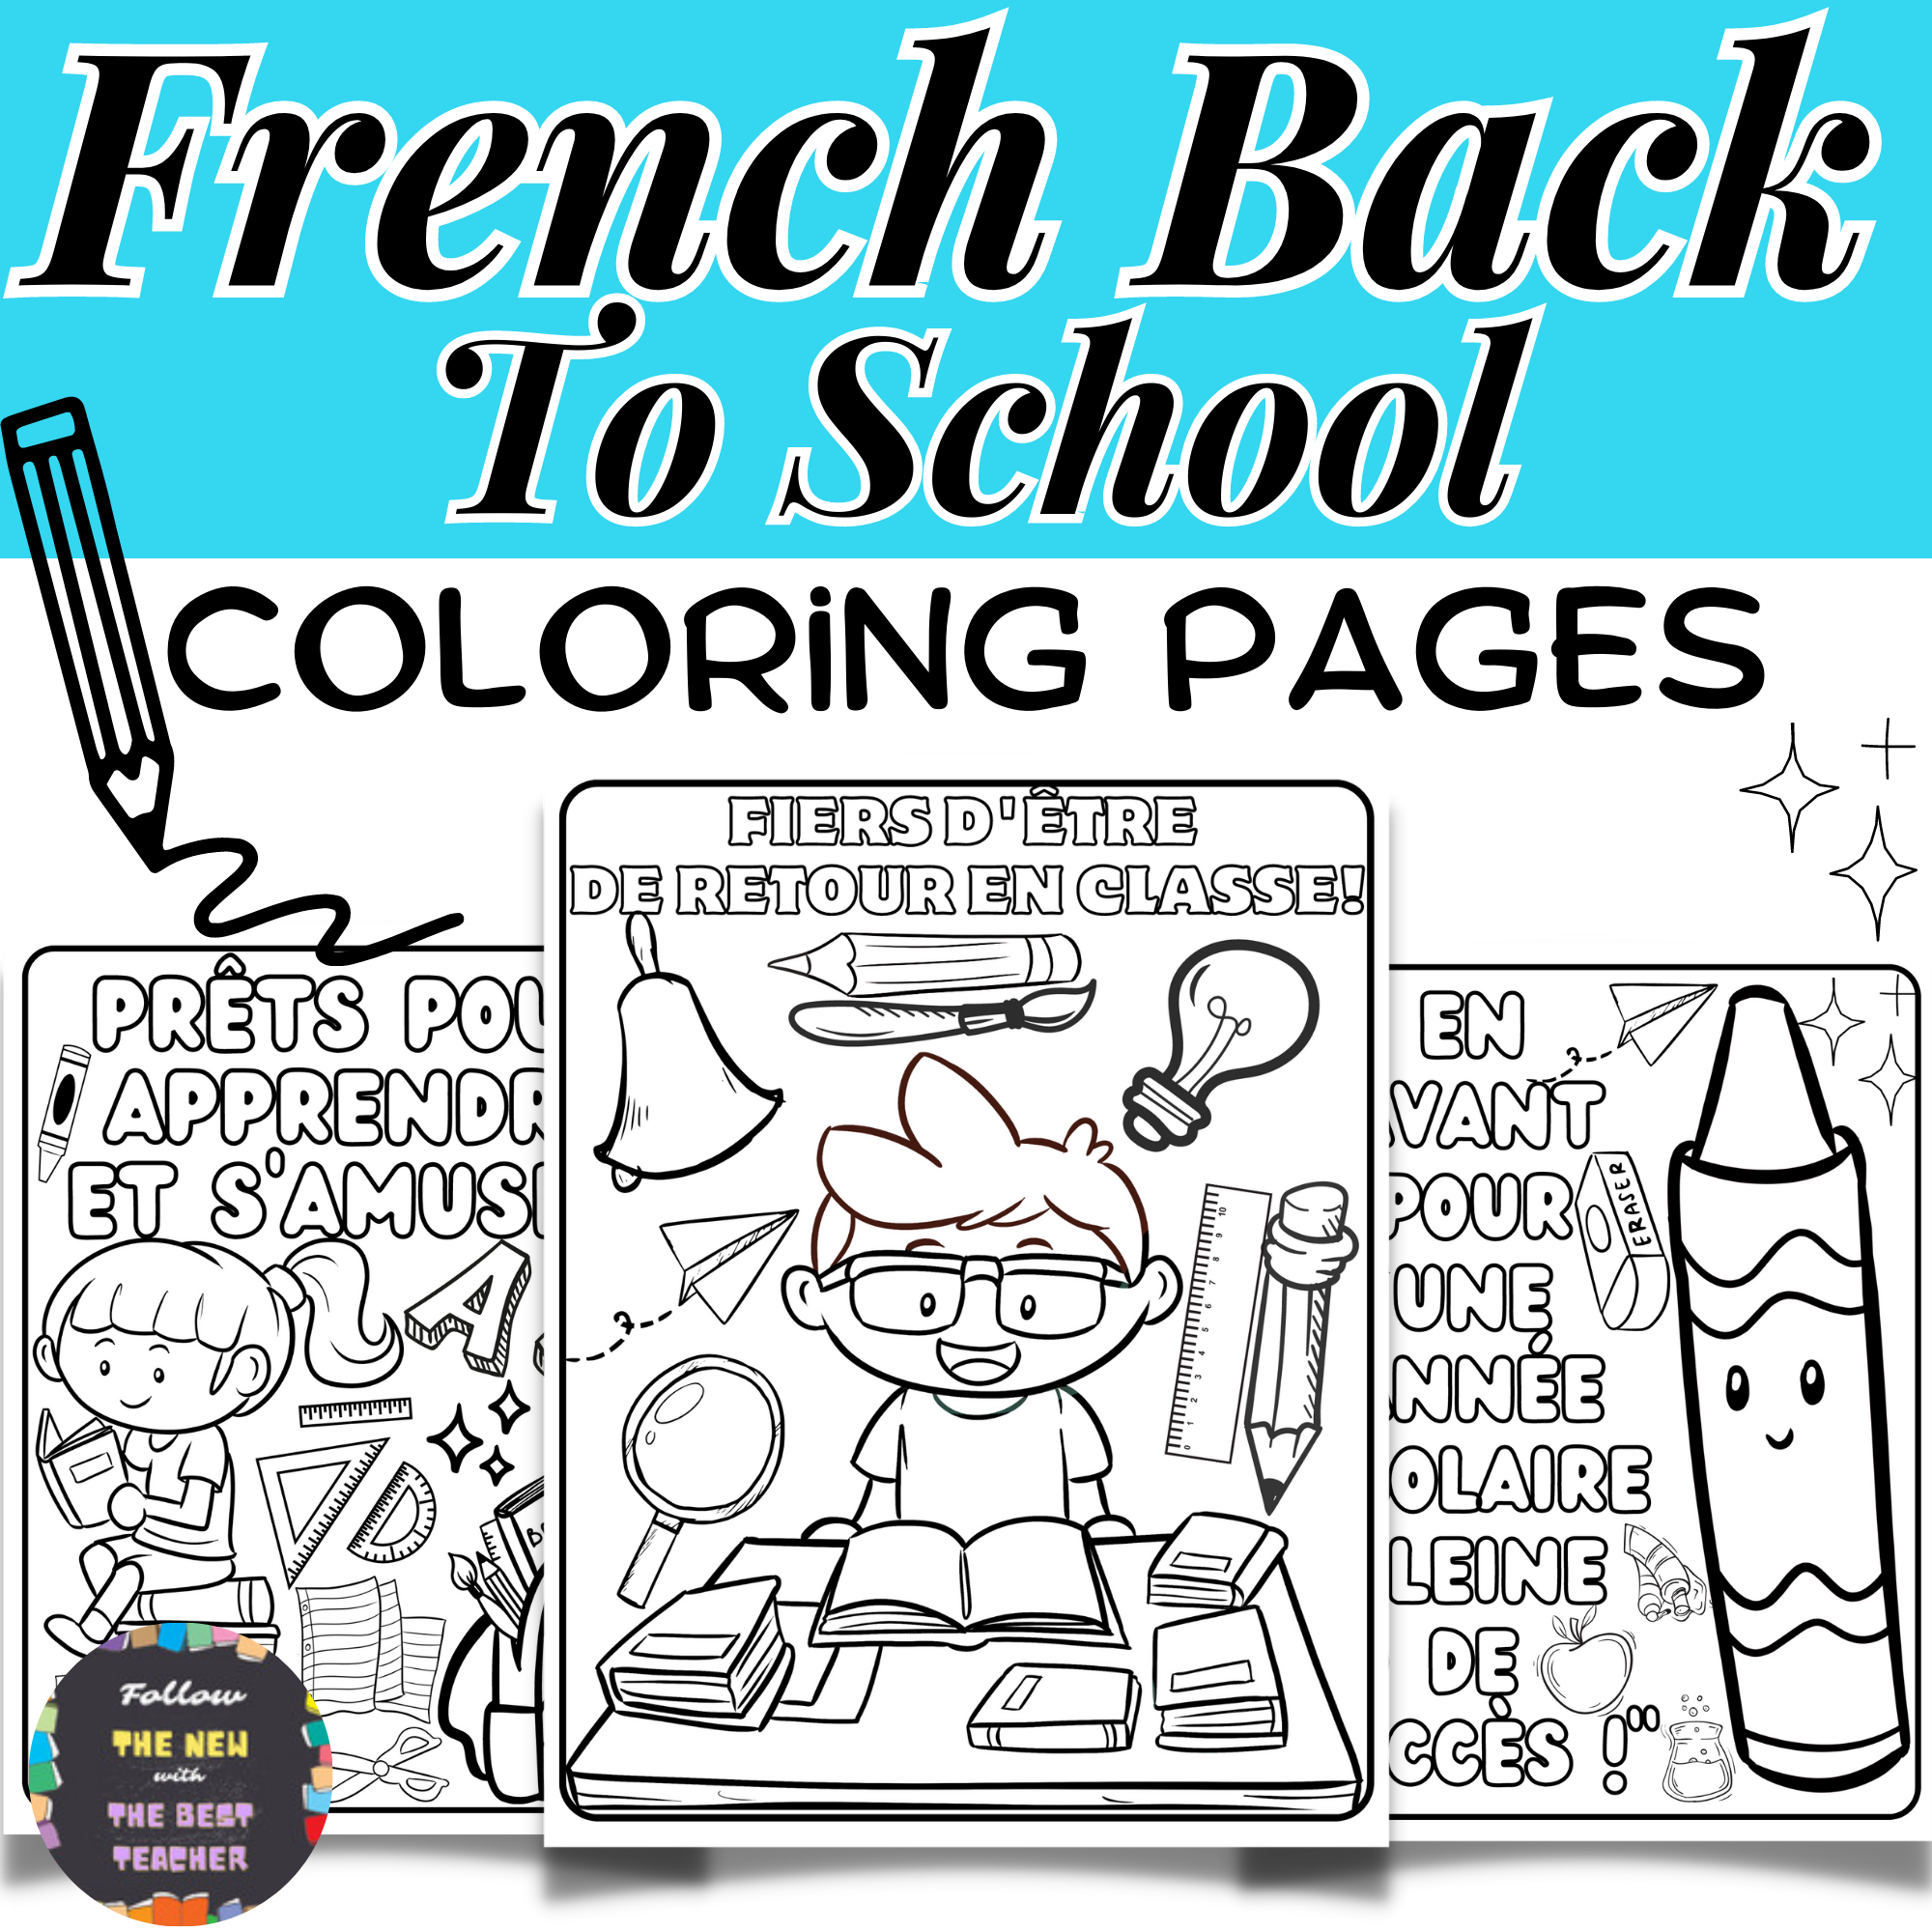 French back to school coloring pages rentrãe scolaire coloriage made by teachers